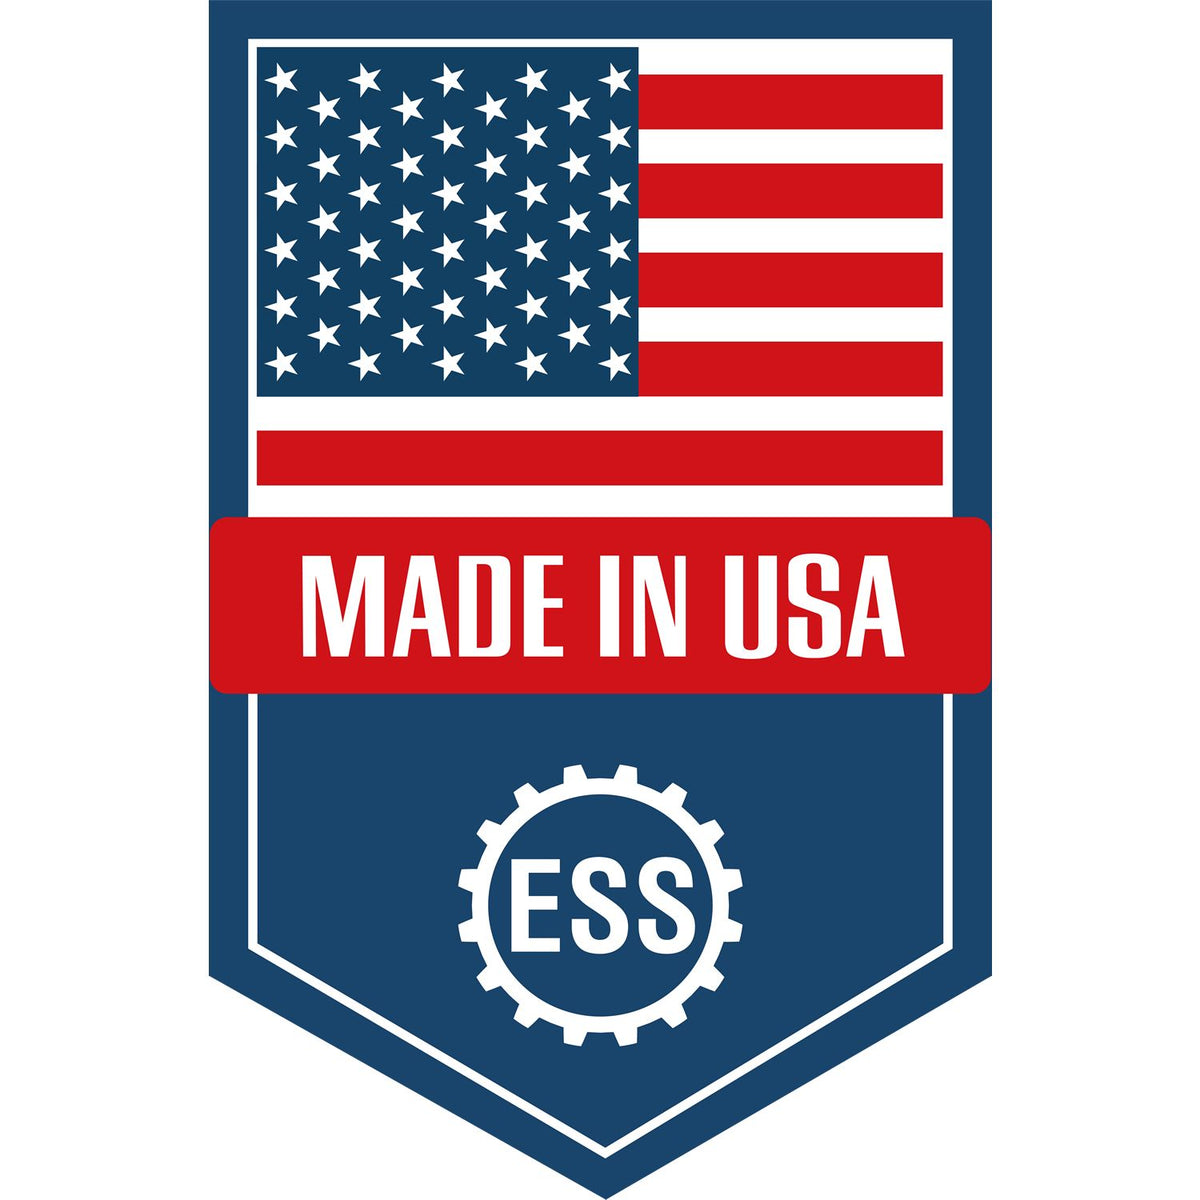 An icon or graphic with an american flag and text reading Made in USA for the Self-Inking Rhode Island Landscape Architect Stamp